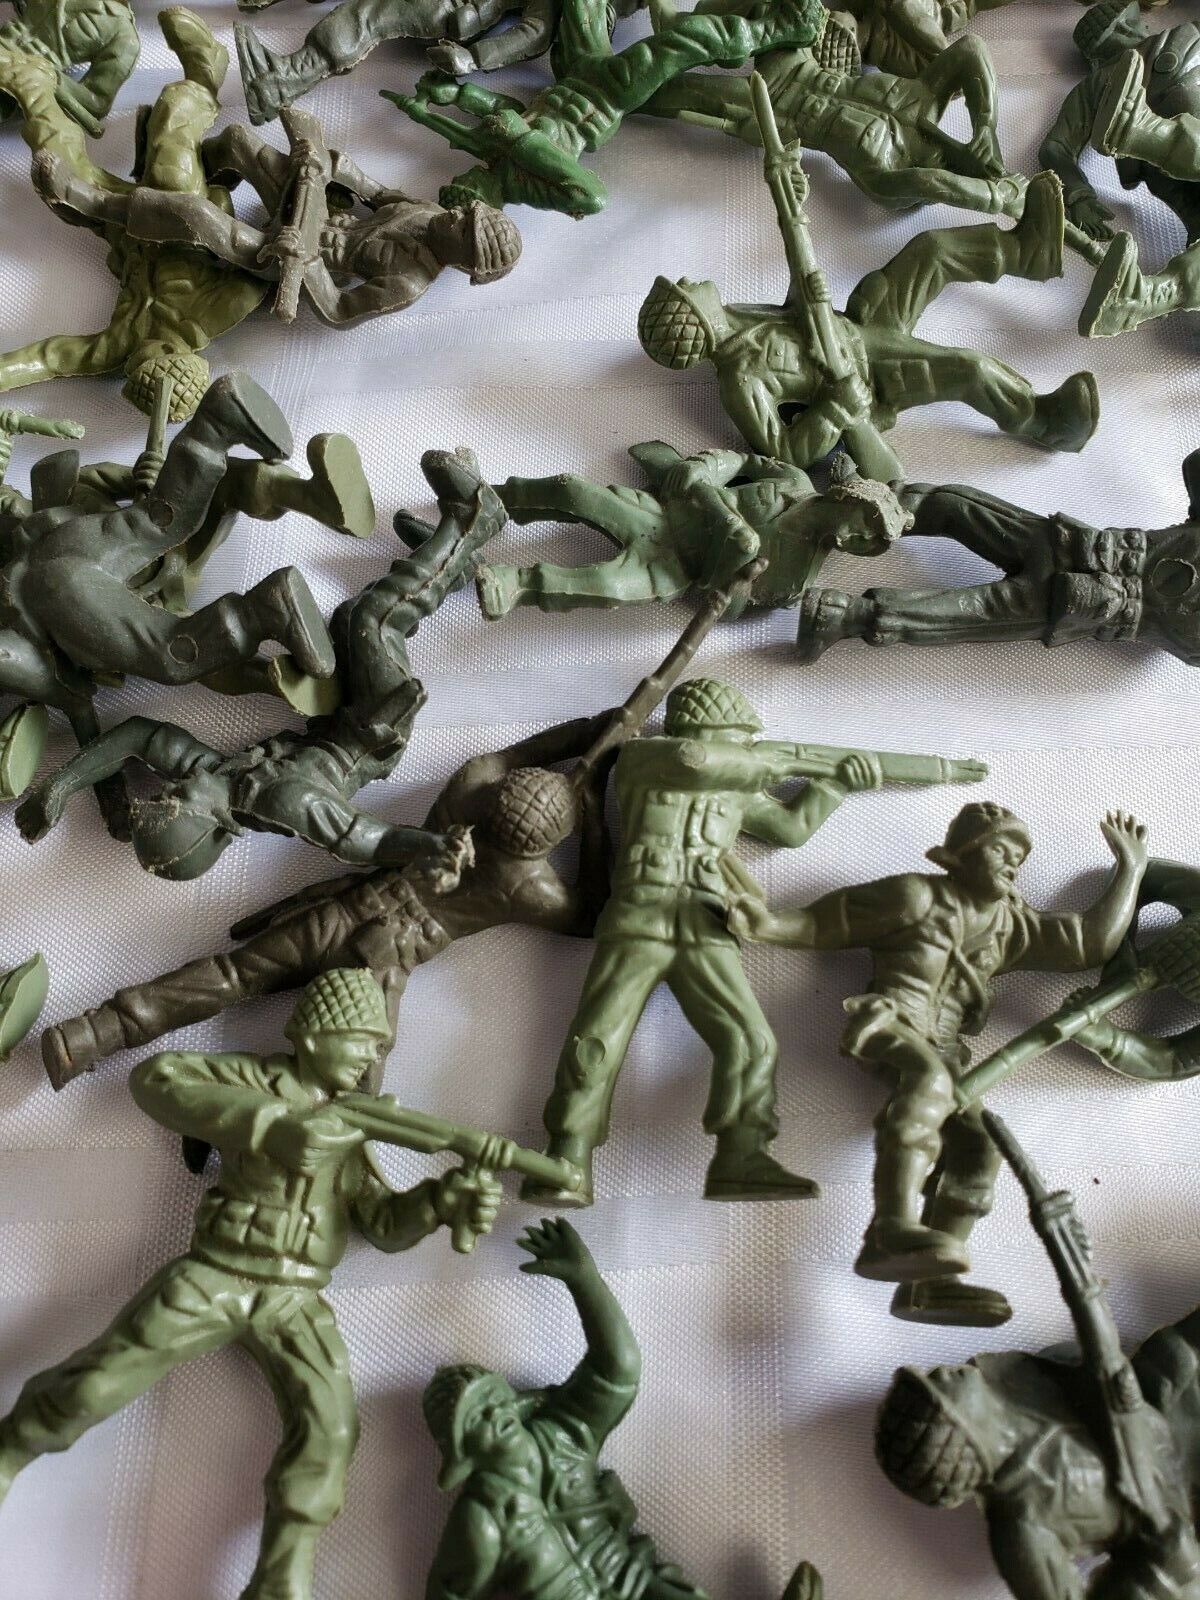 VINTAGE LARGE MIXED LOT OF GREEN ARMY MEN KIDS TOYS ORIGINAL RETRO COLLECTOR'S